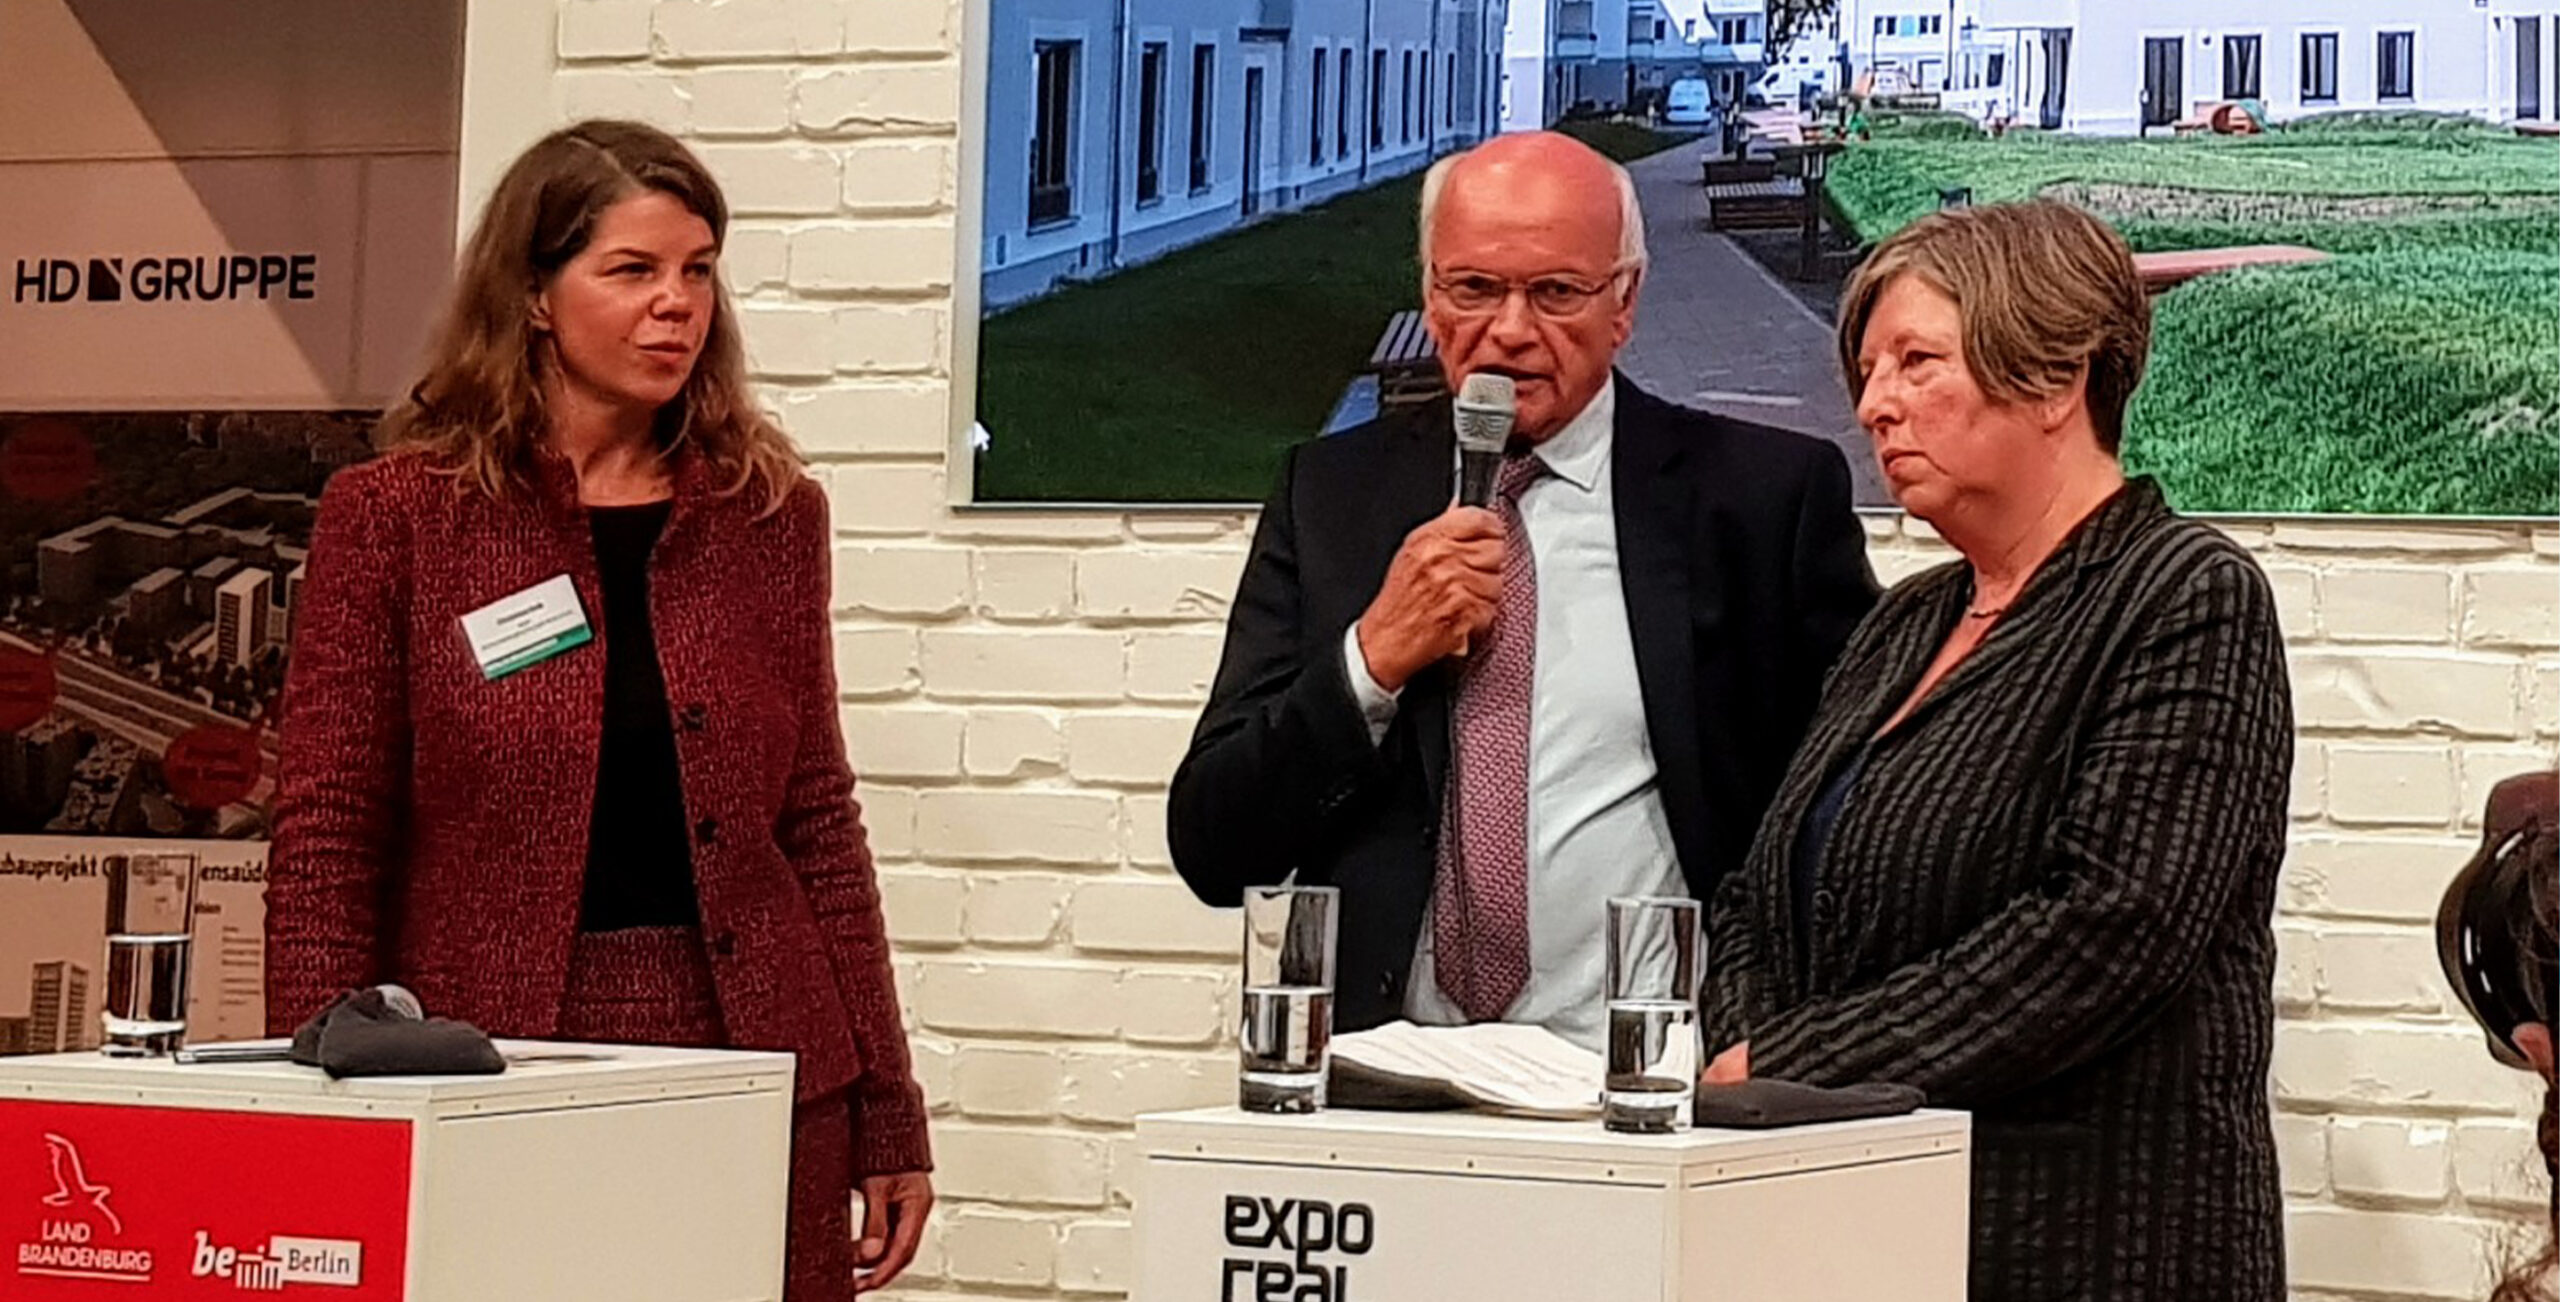 Jürgen Kilian at the EXPO REAL in Munich